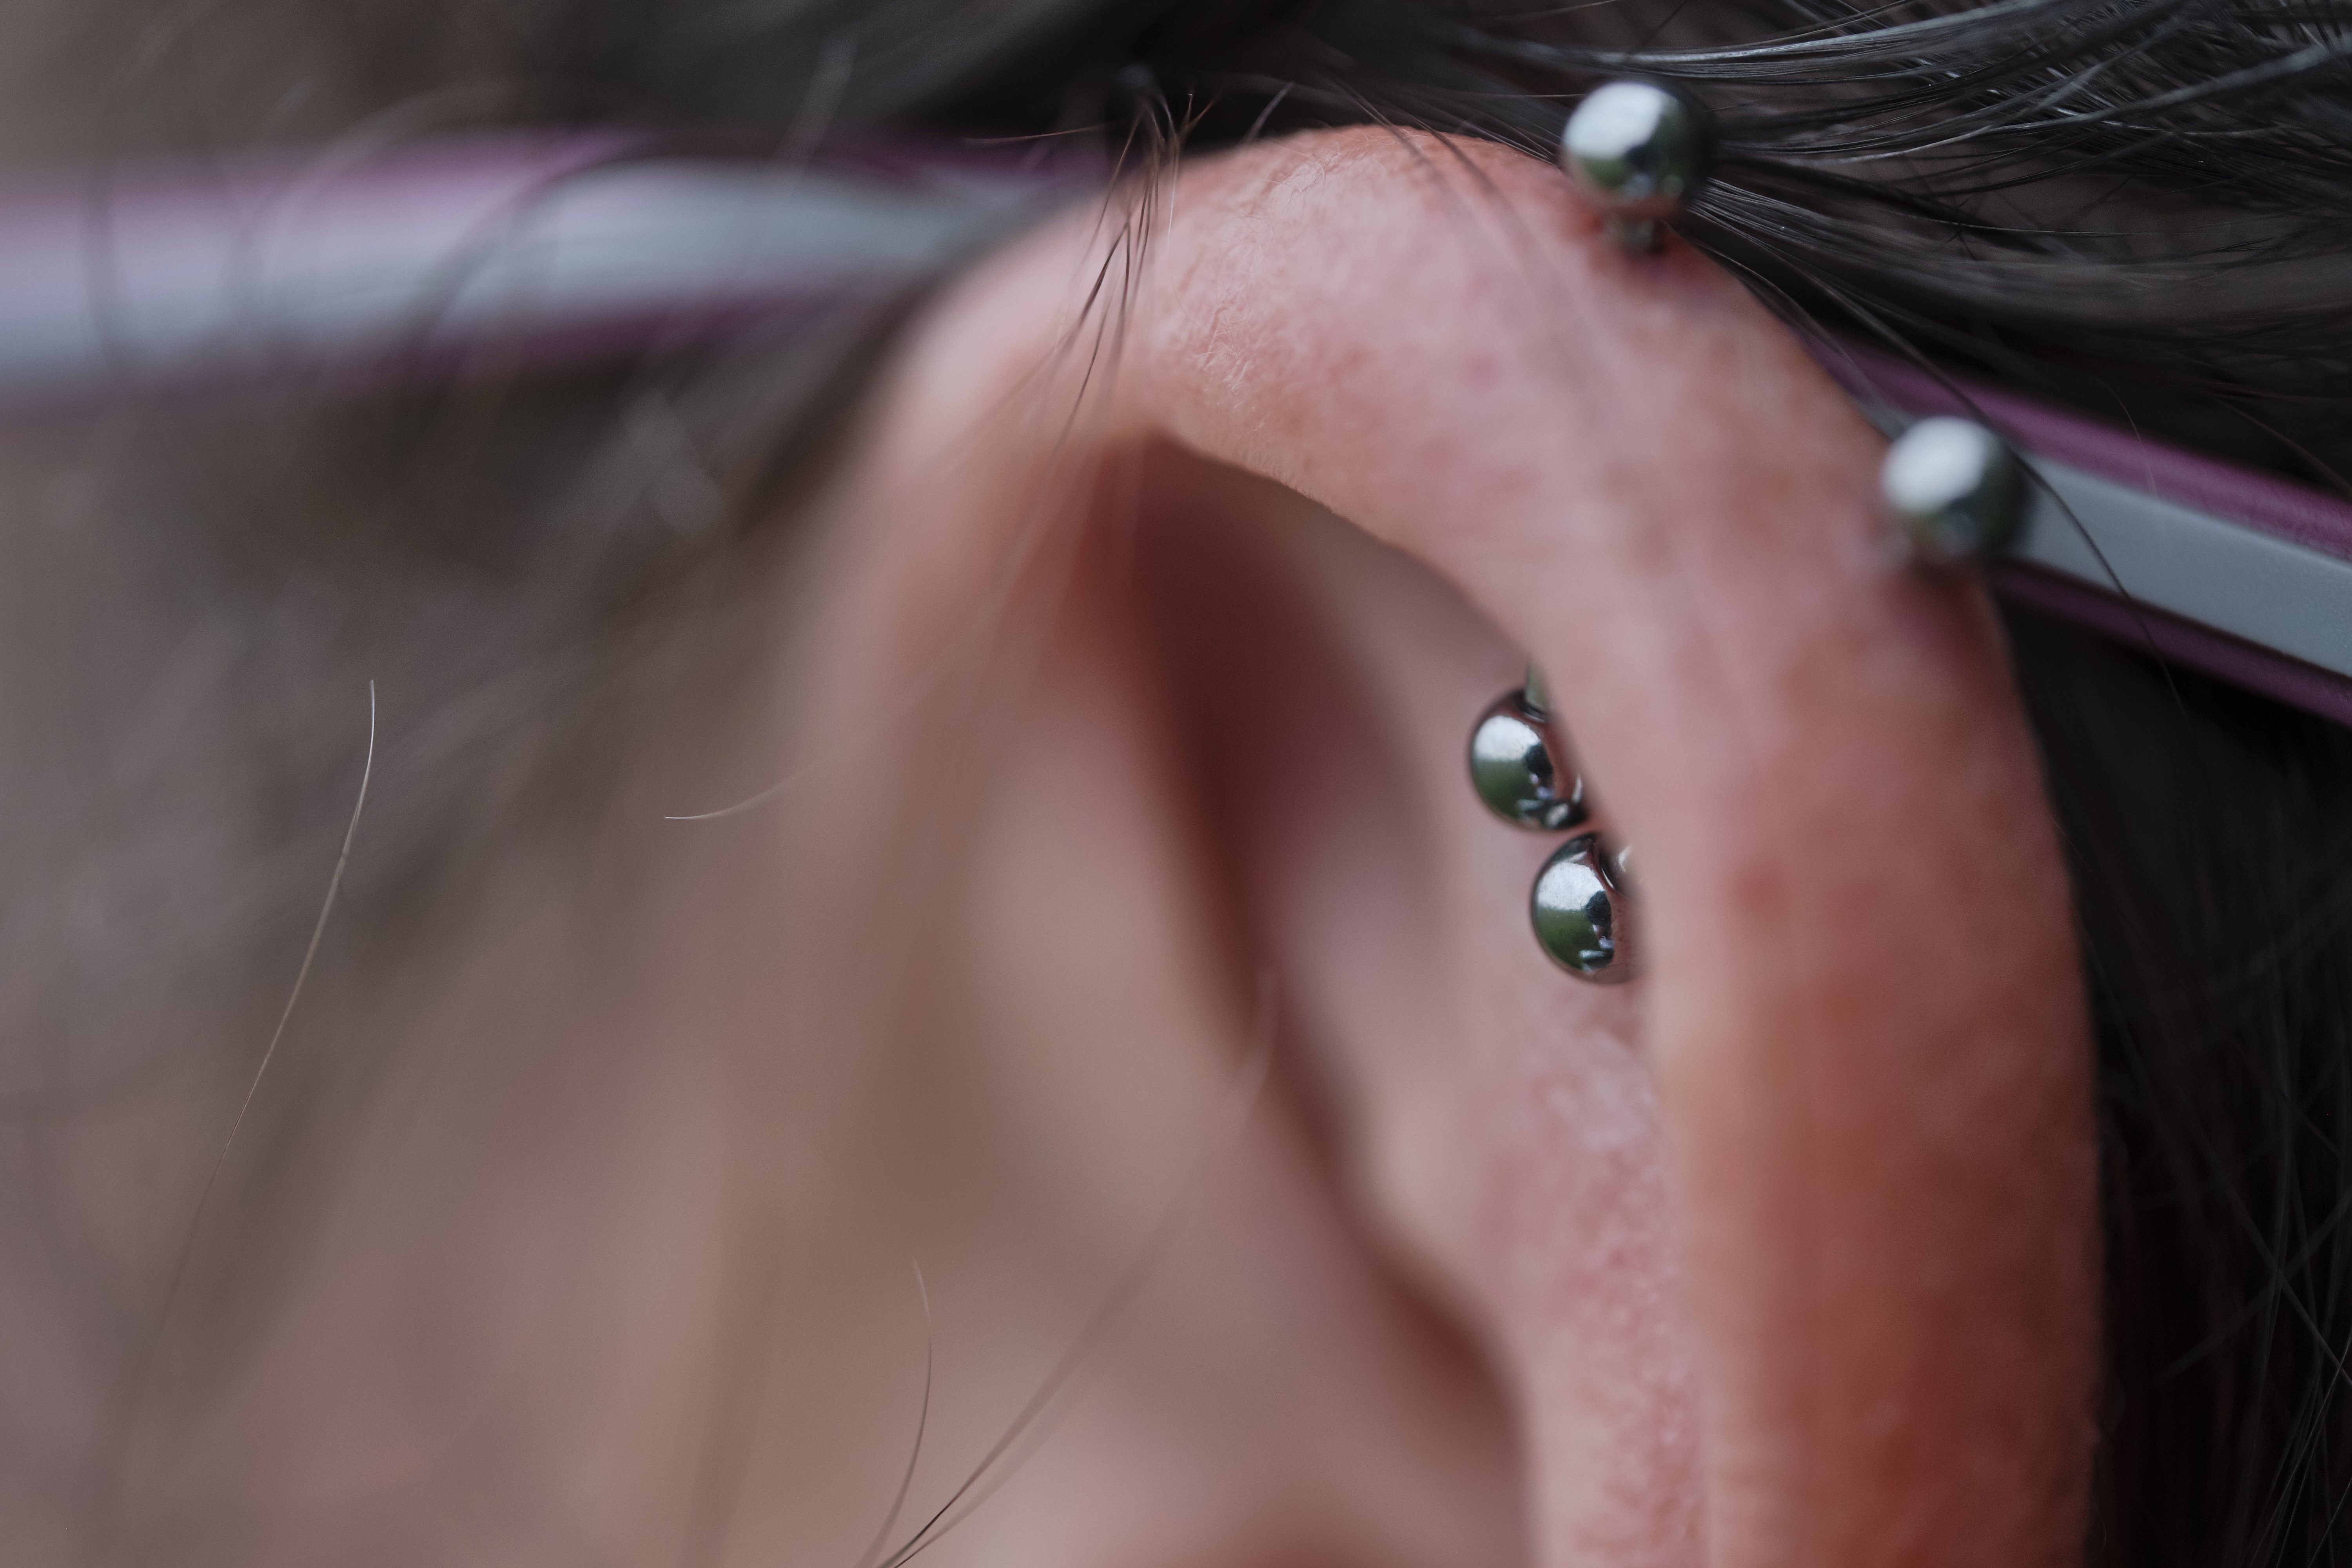 A close-up of a woman with a double helix piercing | Source: Getty Images